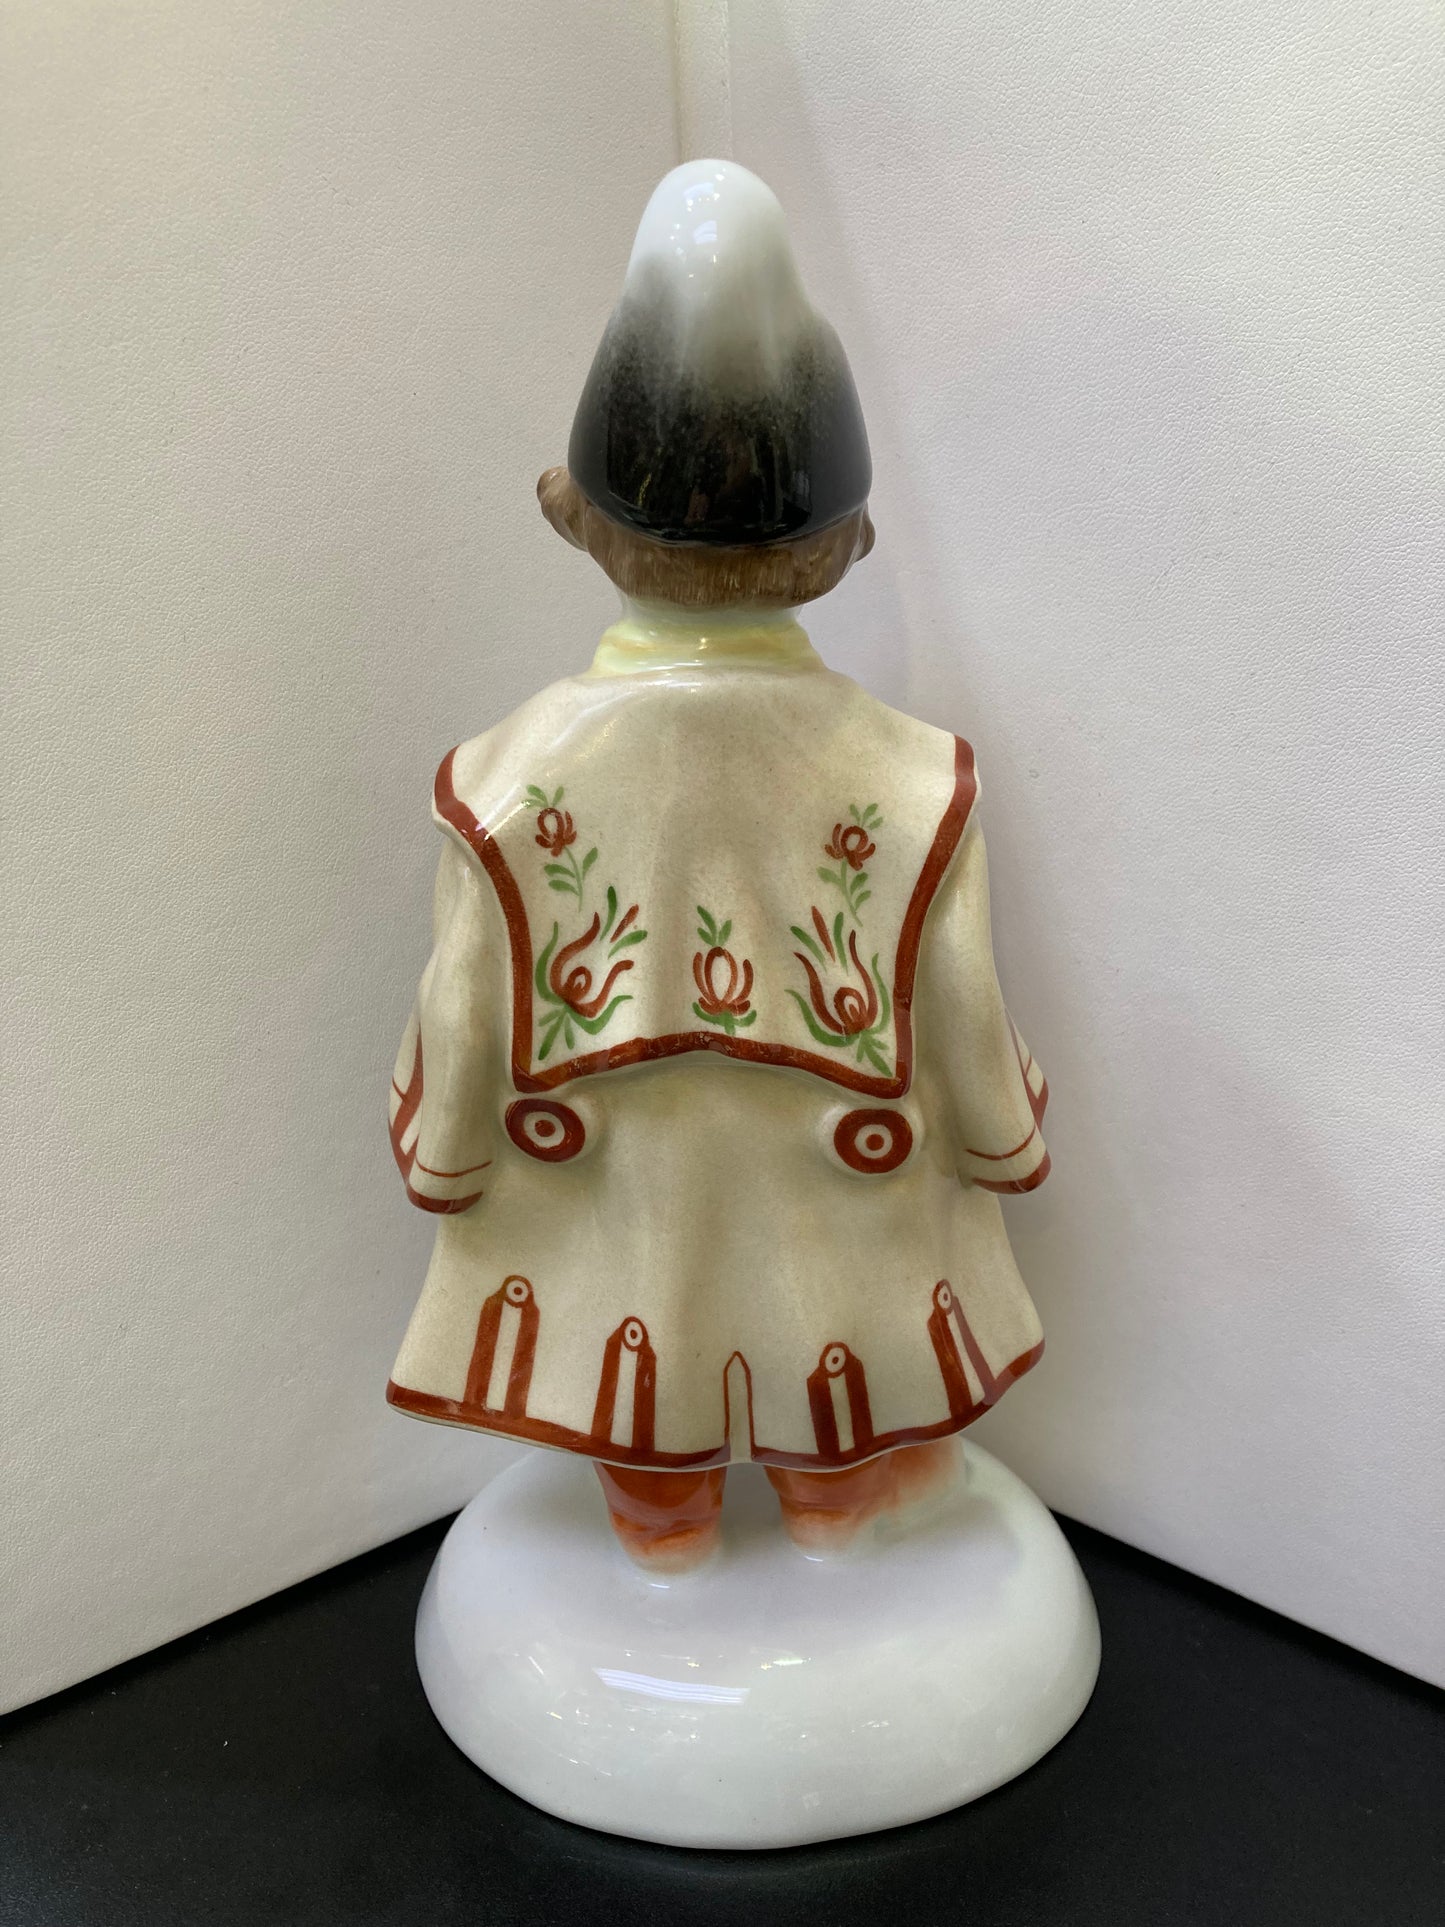 Herend Nativity figurine from Hungary. Hand painted boy.